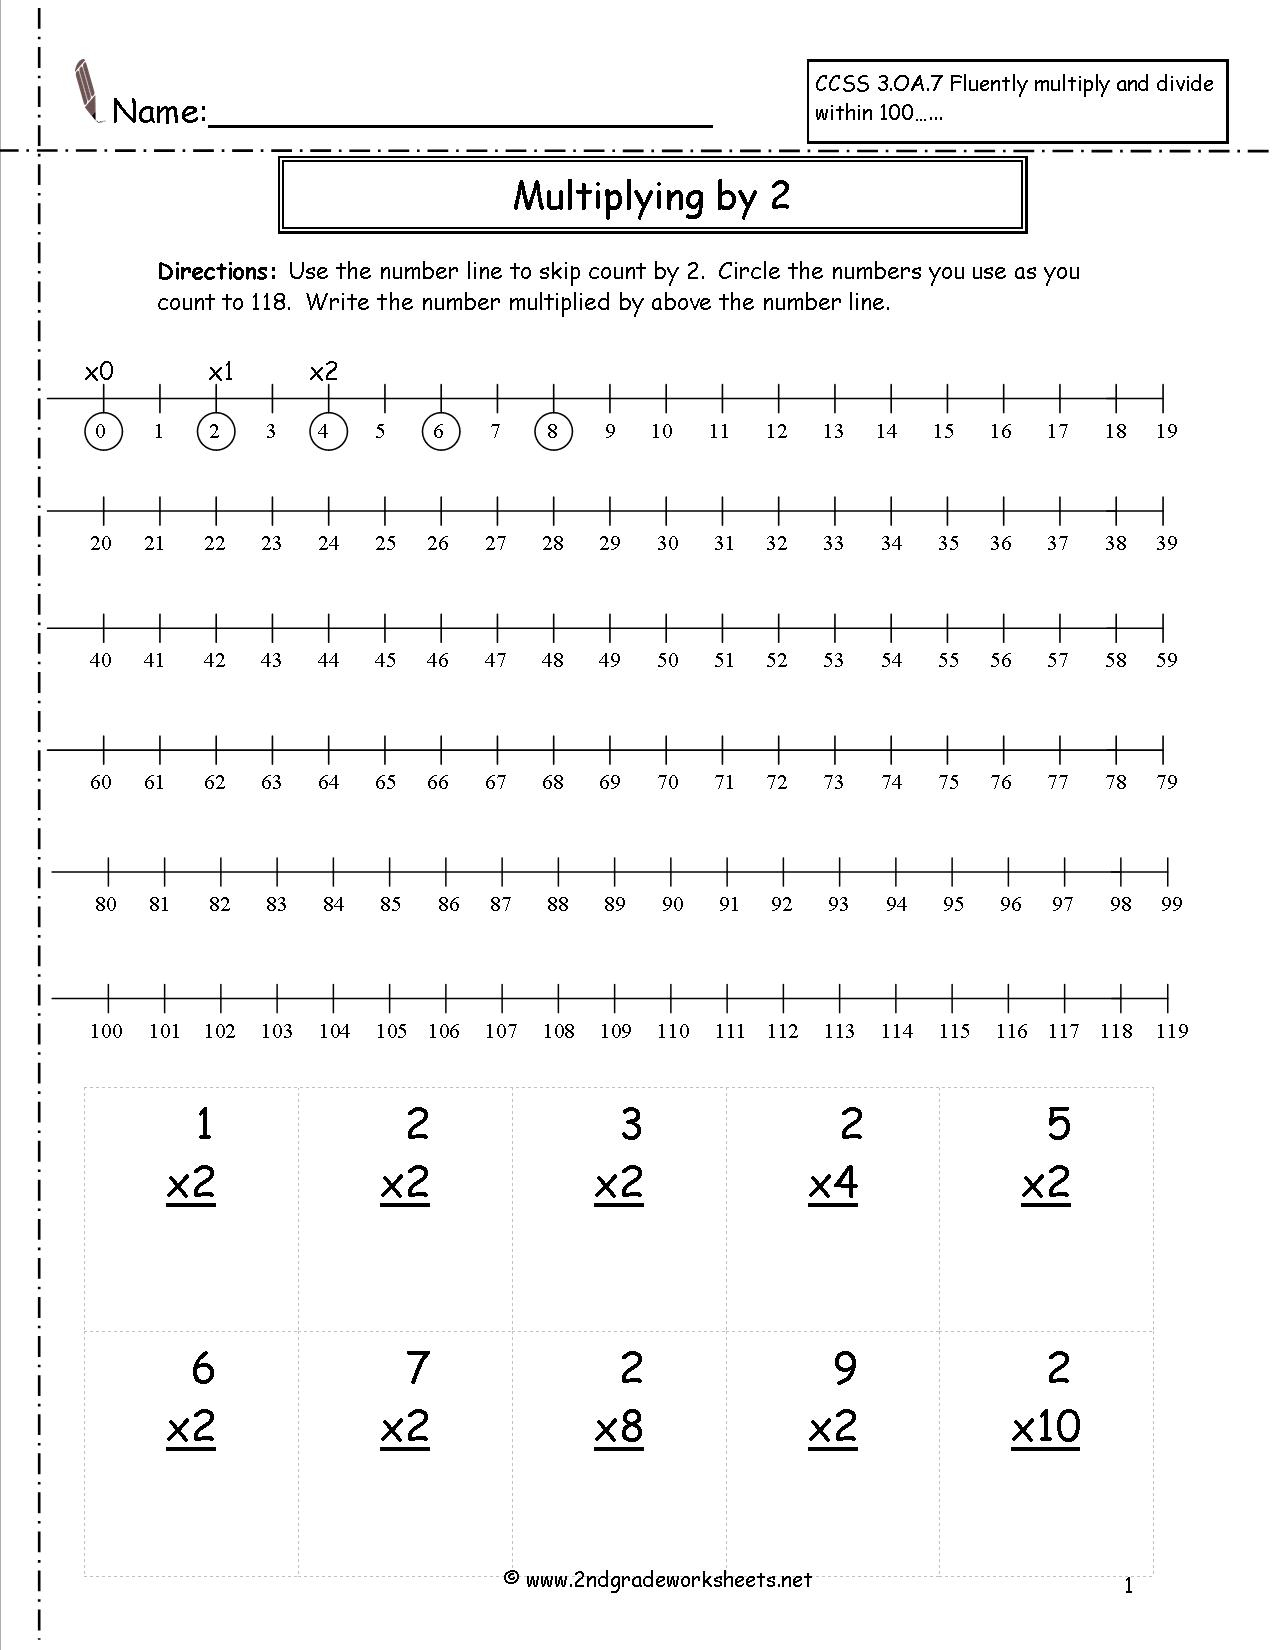 Multiplication Worksheets And Printouts - Free Printable Multiplication Fact Sheets